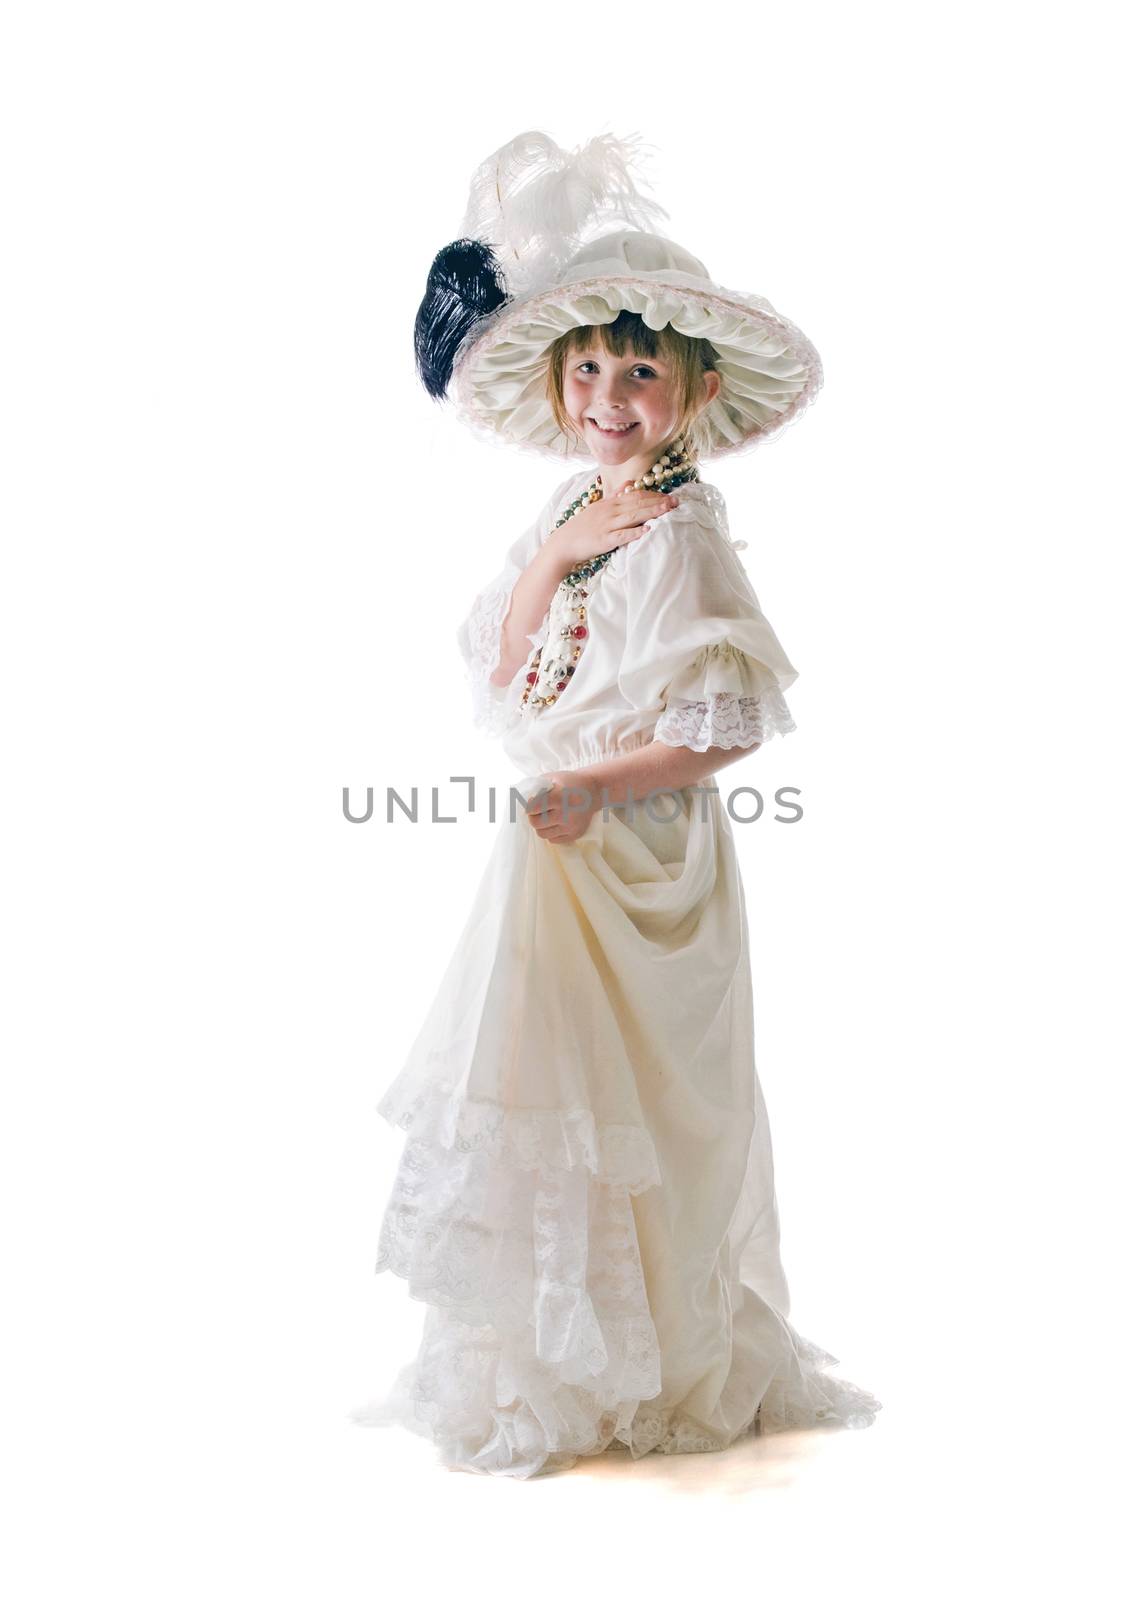 Pretty little girl enjoying Grandma's hat and dress to play dress-up in.